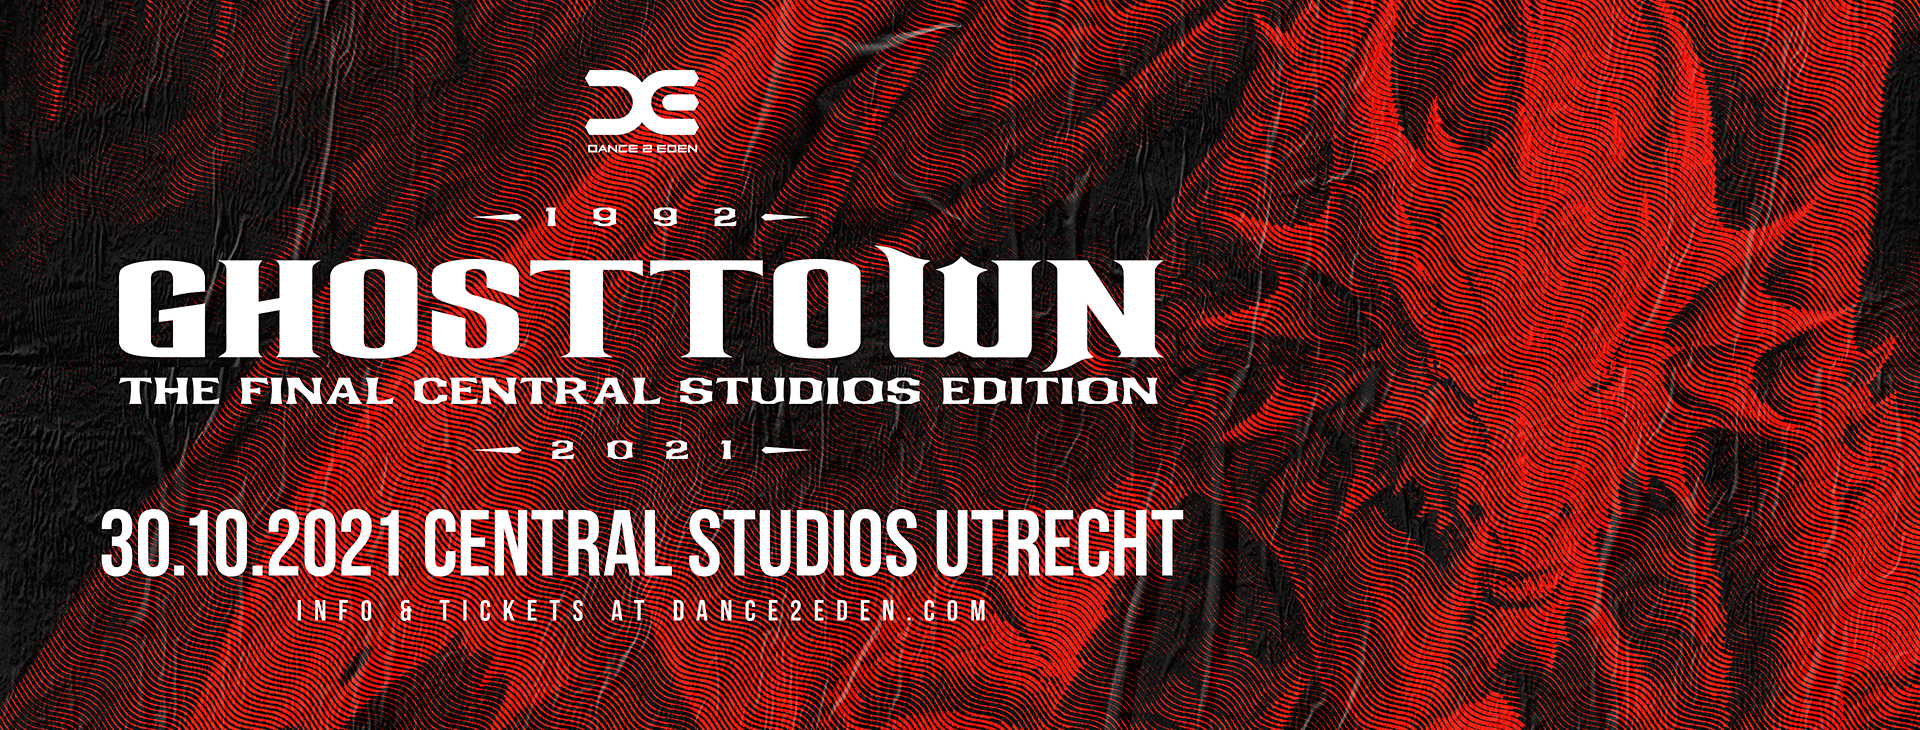 Line-up release Ghosttown - The Final Central Studios Edition